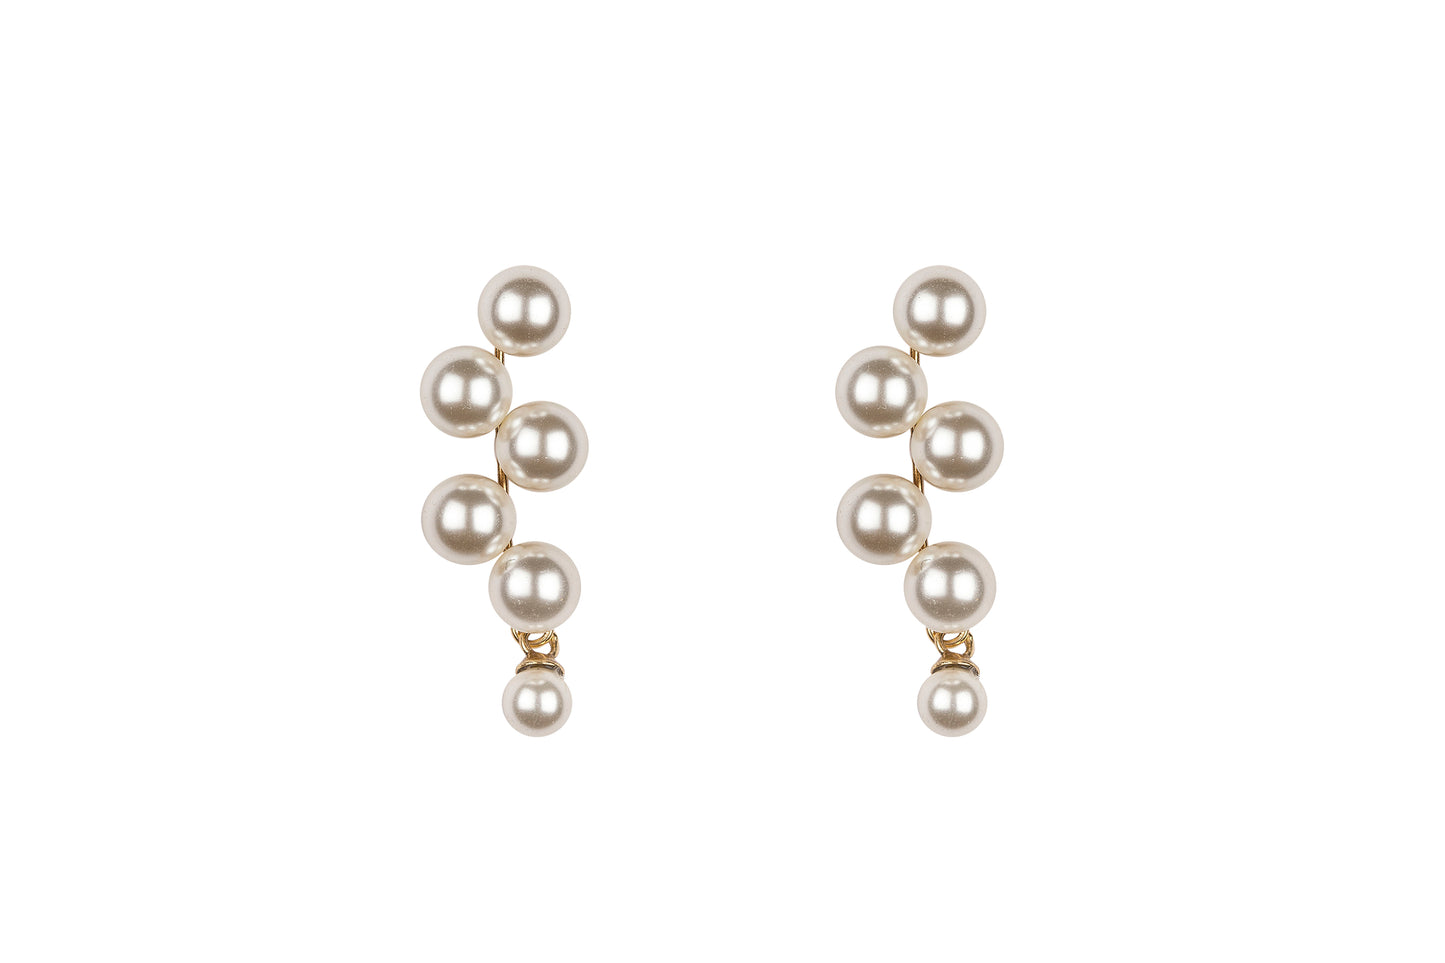 The Marcella Earring